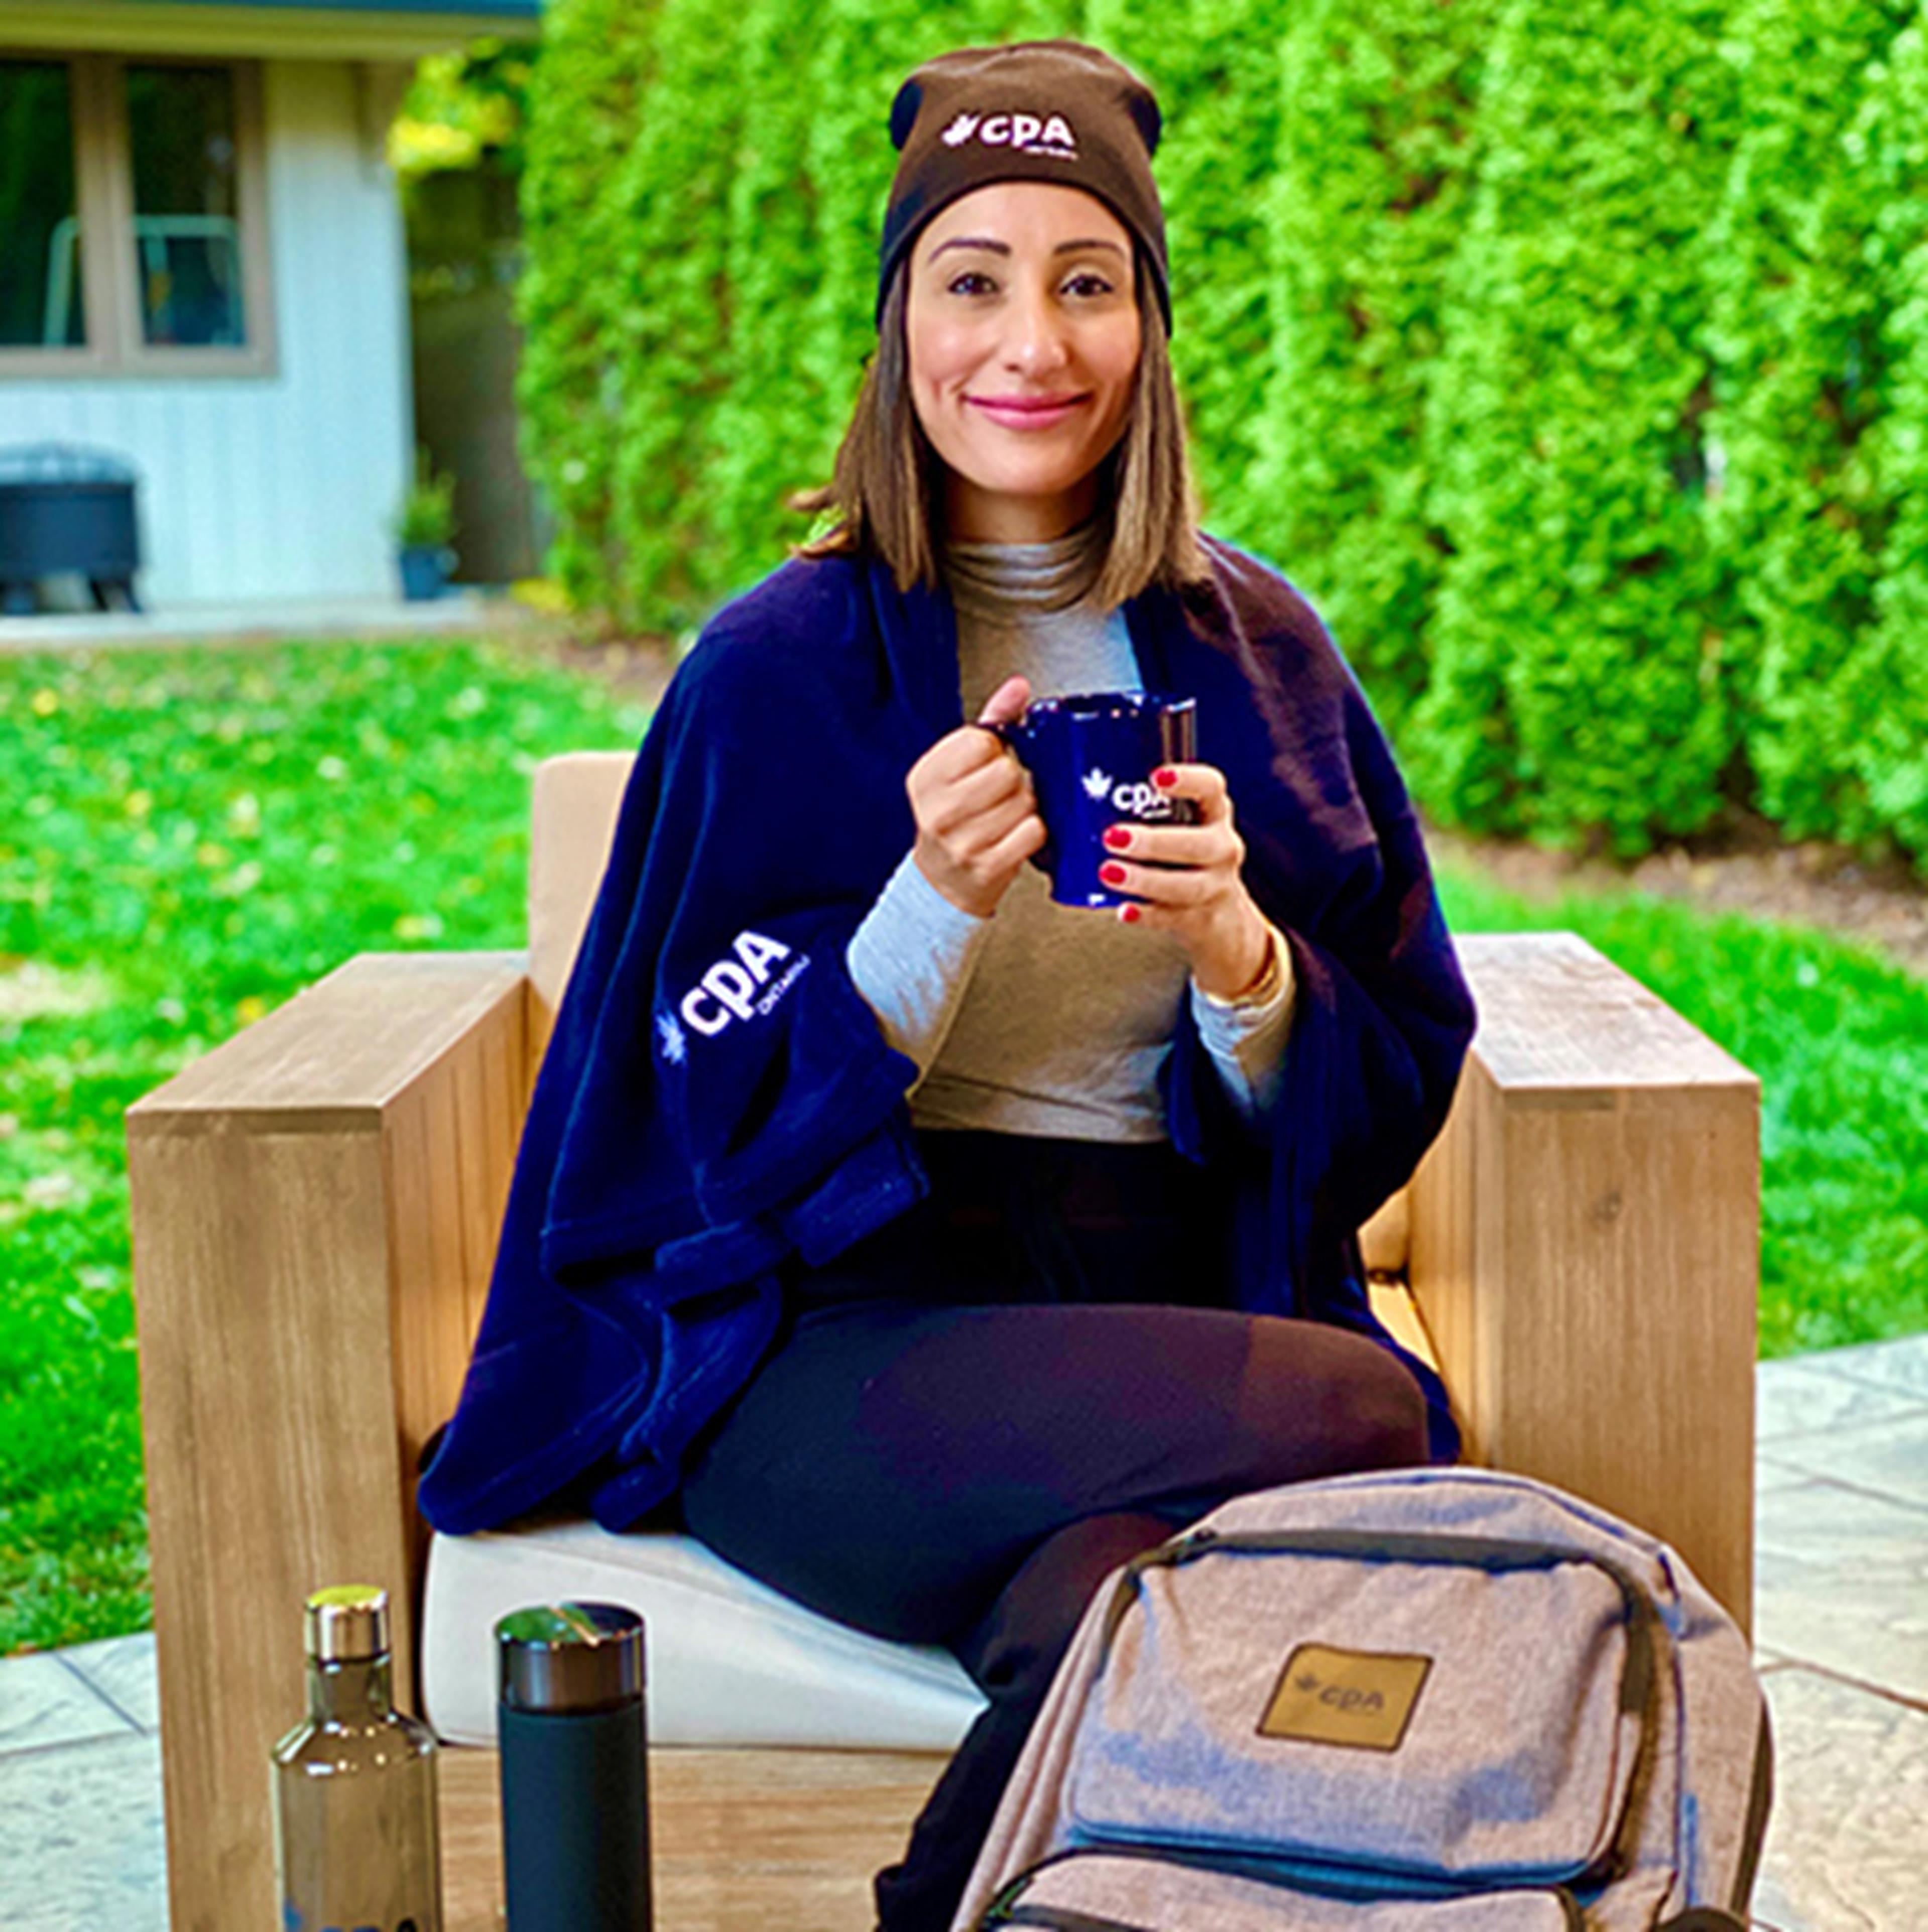 Narmin sitting on a chair outside with a CPA hat, mug and blanket